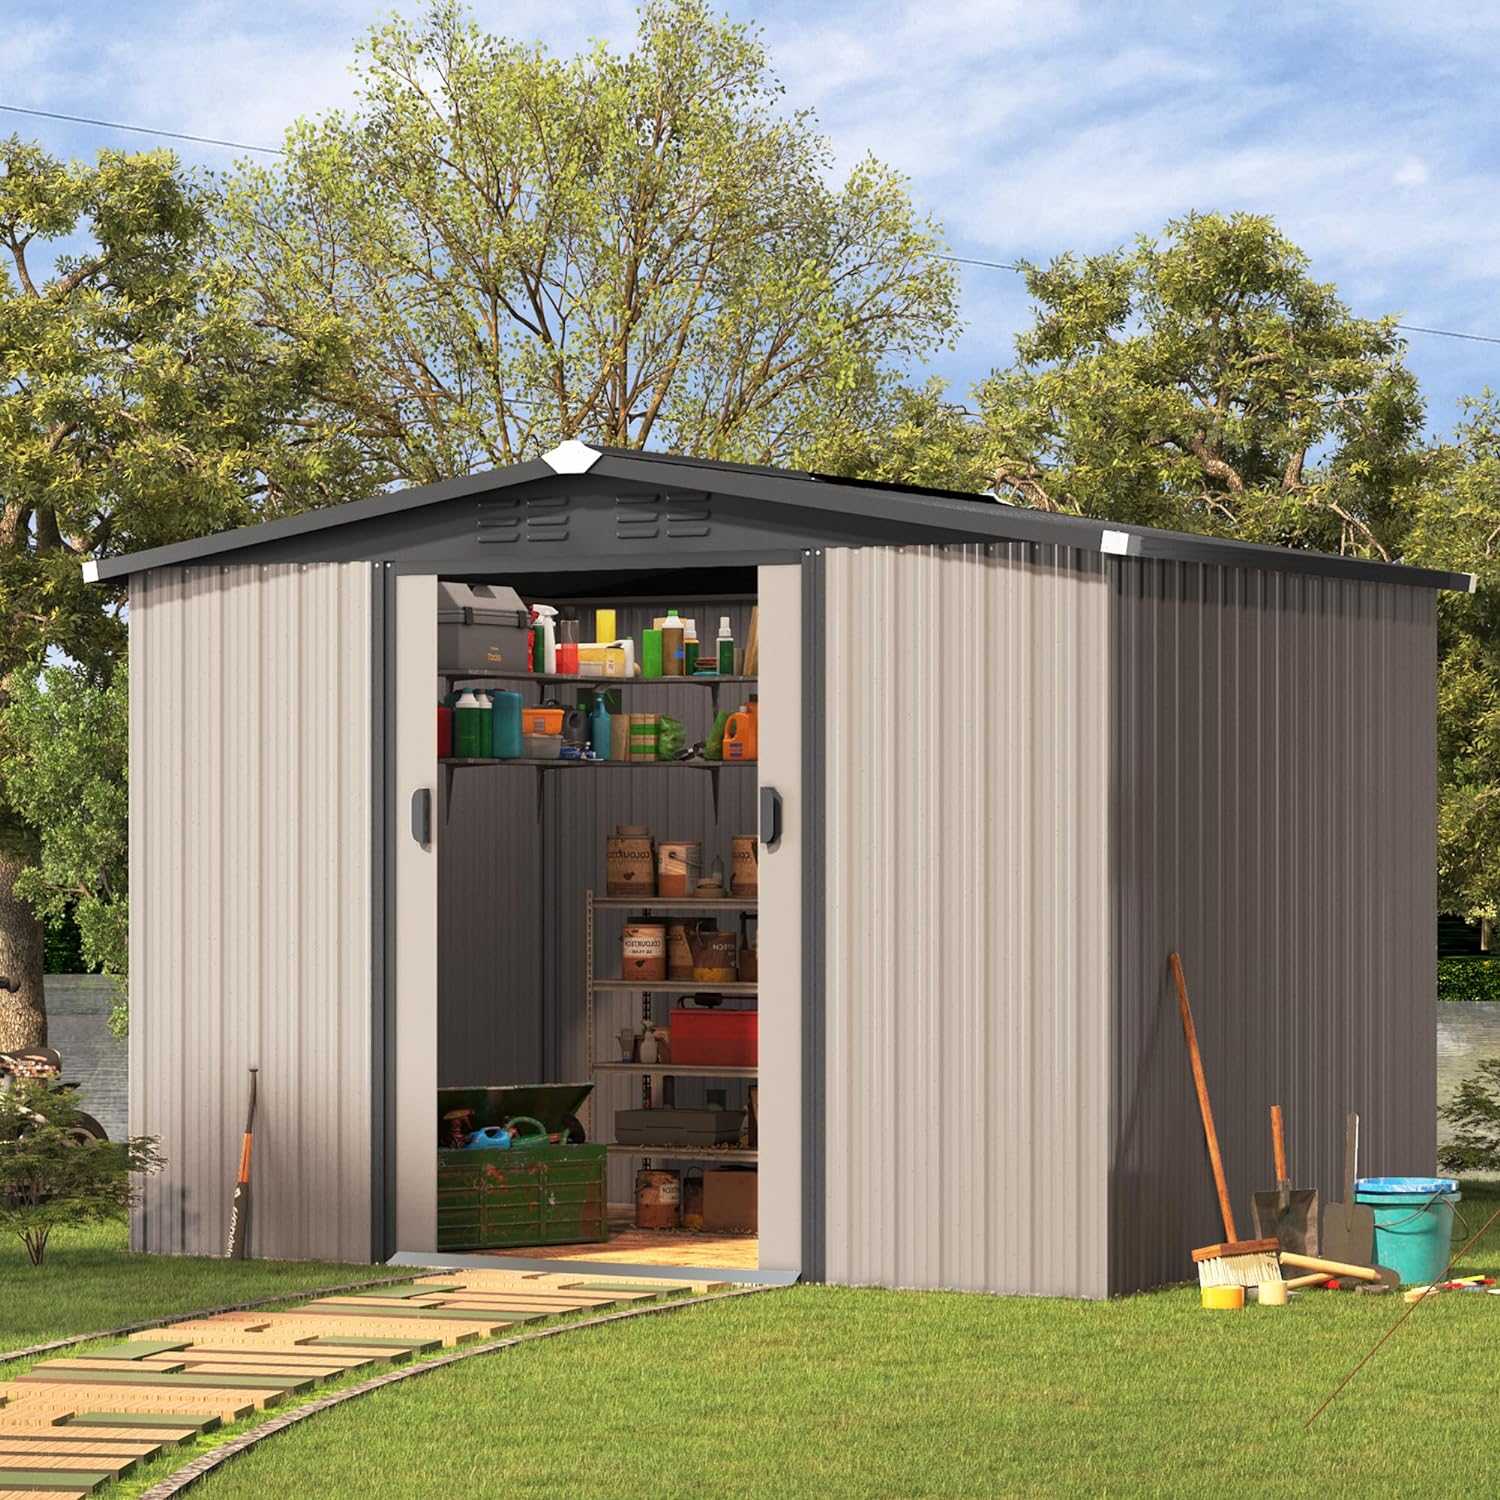 AECOJOY 8 x 6 Ft Shed, Outdoor Storage Tool Shed (Sliding Door), Metal Garden Shed for Yard, Outdoor Storage Clearance in Grey